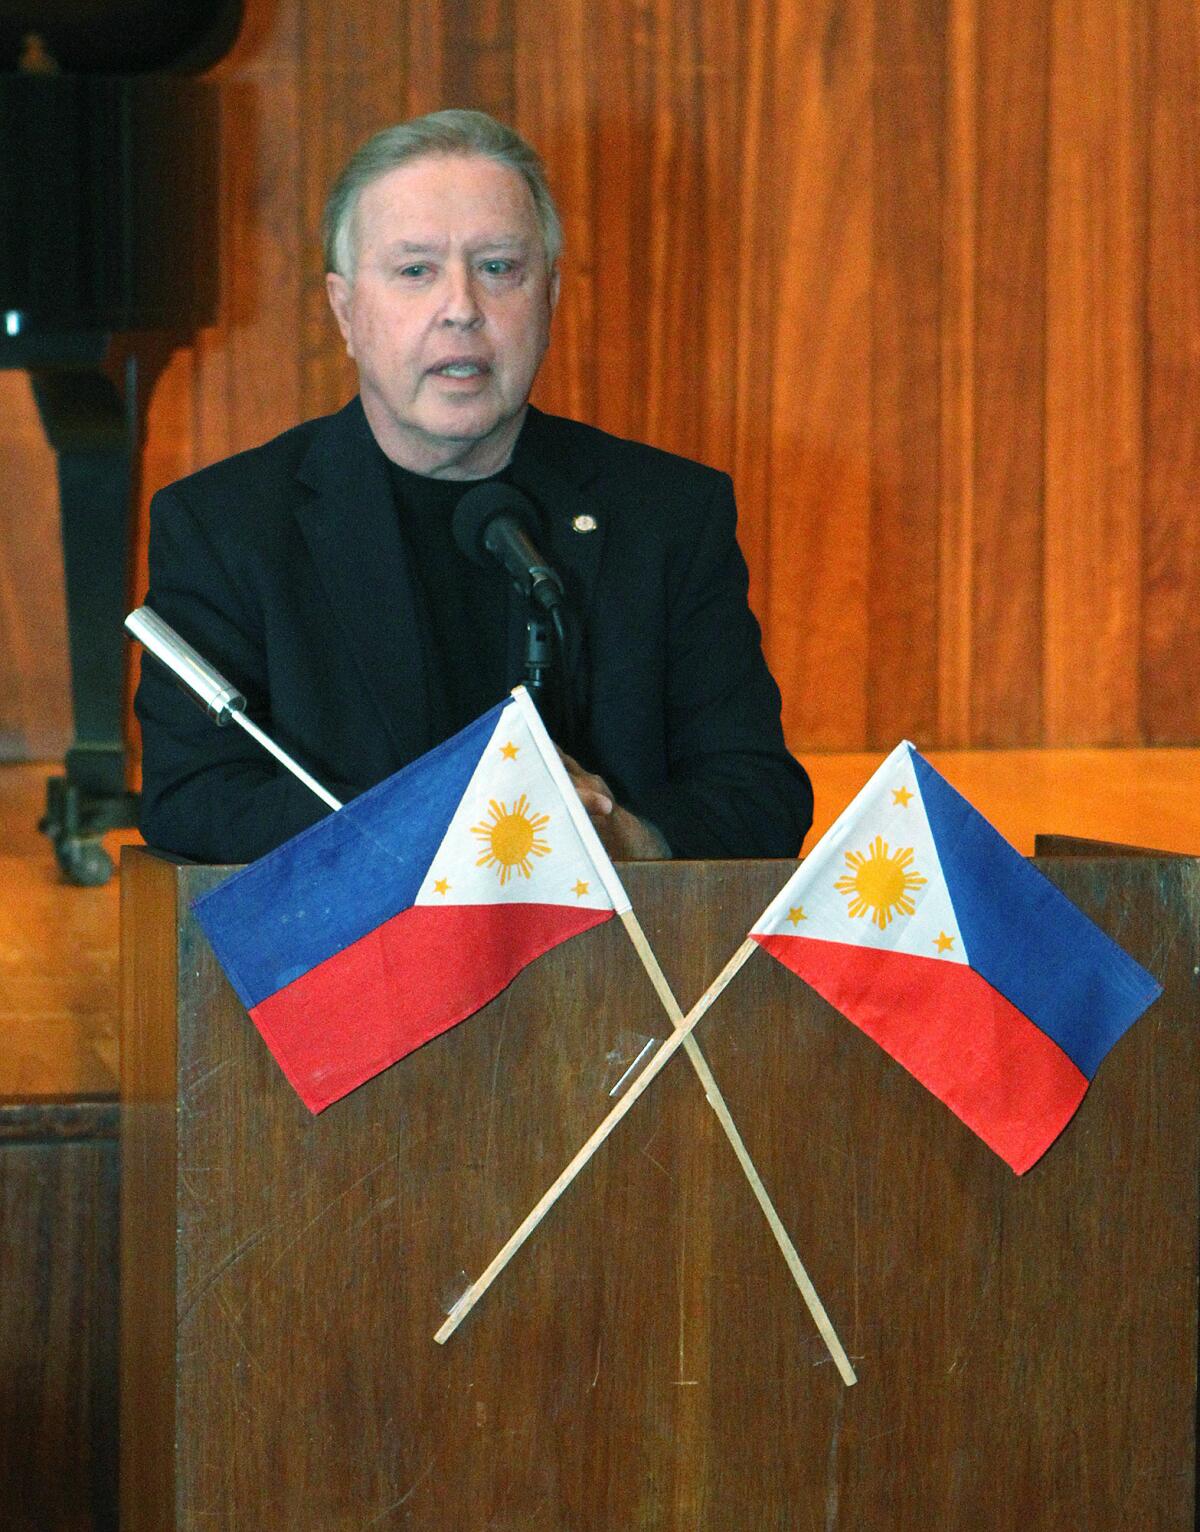 Mayor Dave Weaver addressing the crowd at a celebration of Philippine Heritage - Arts and Culture at the Glendale Library on Friday, October 11, 2013.